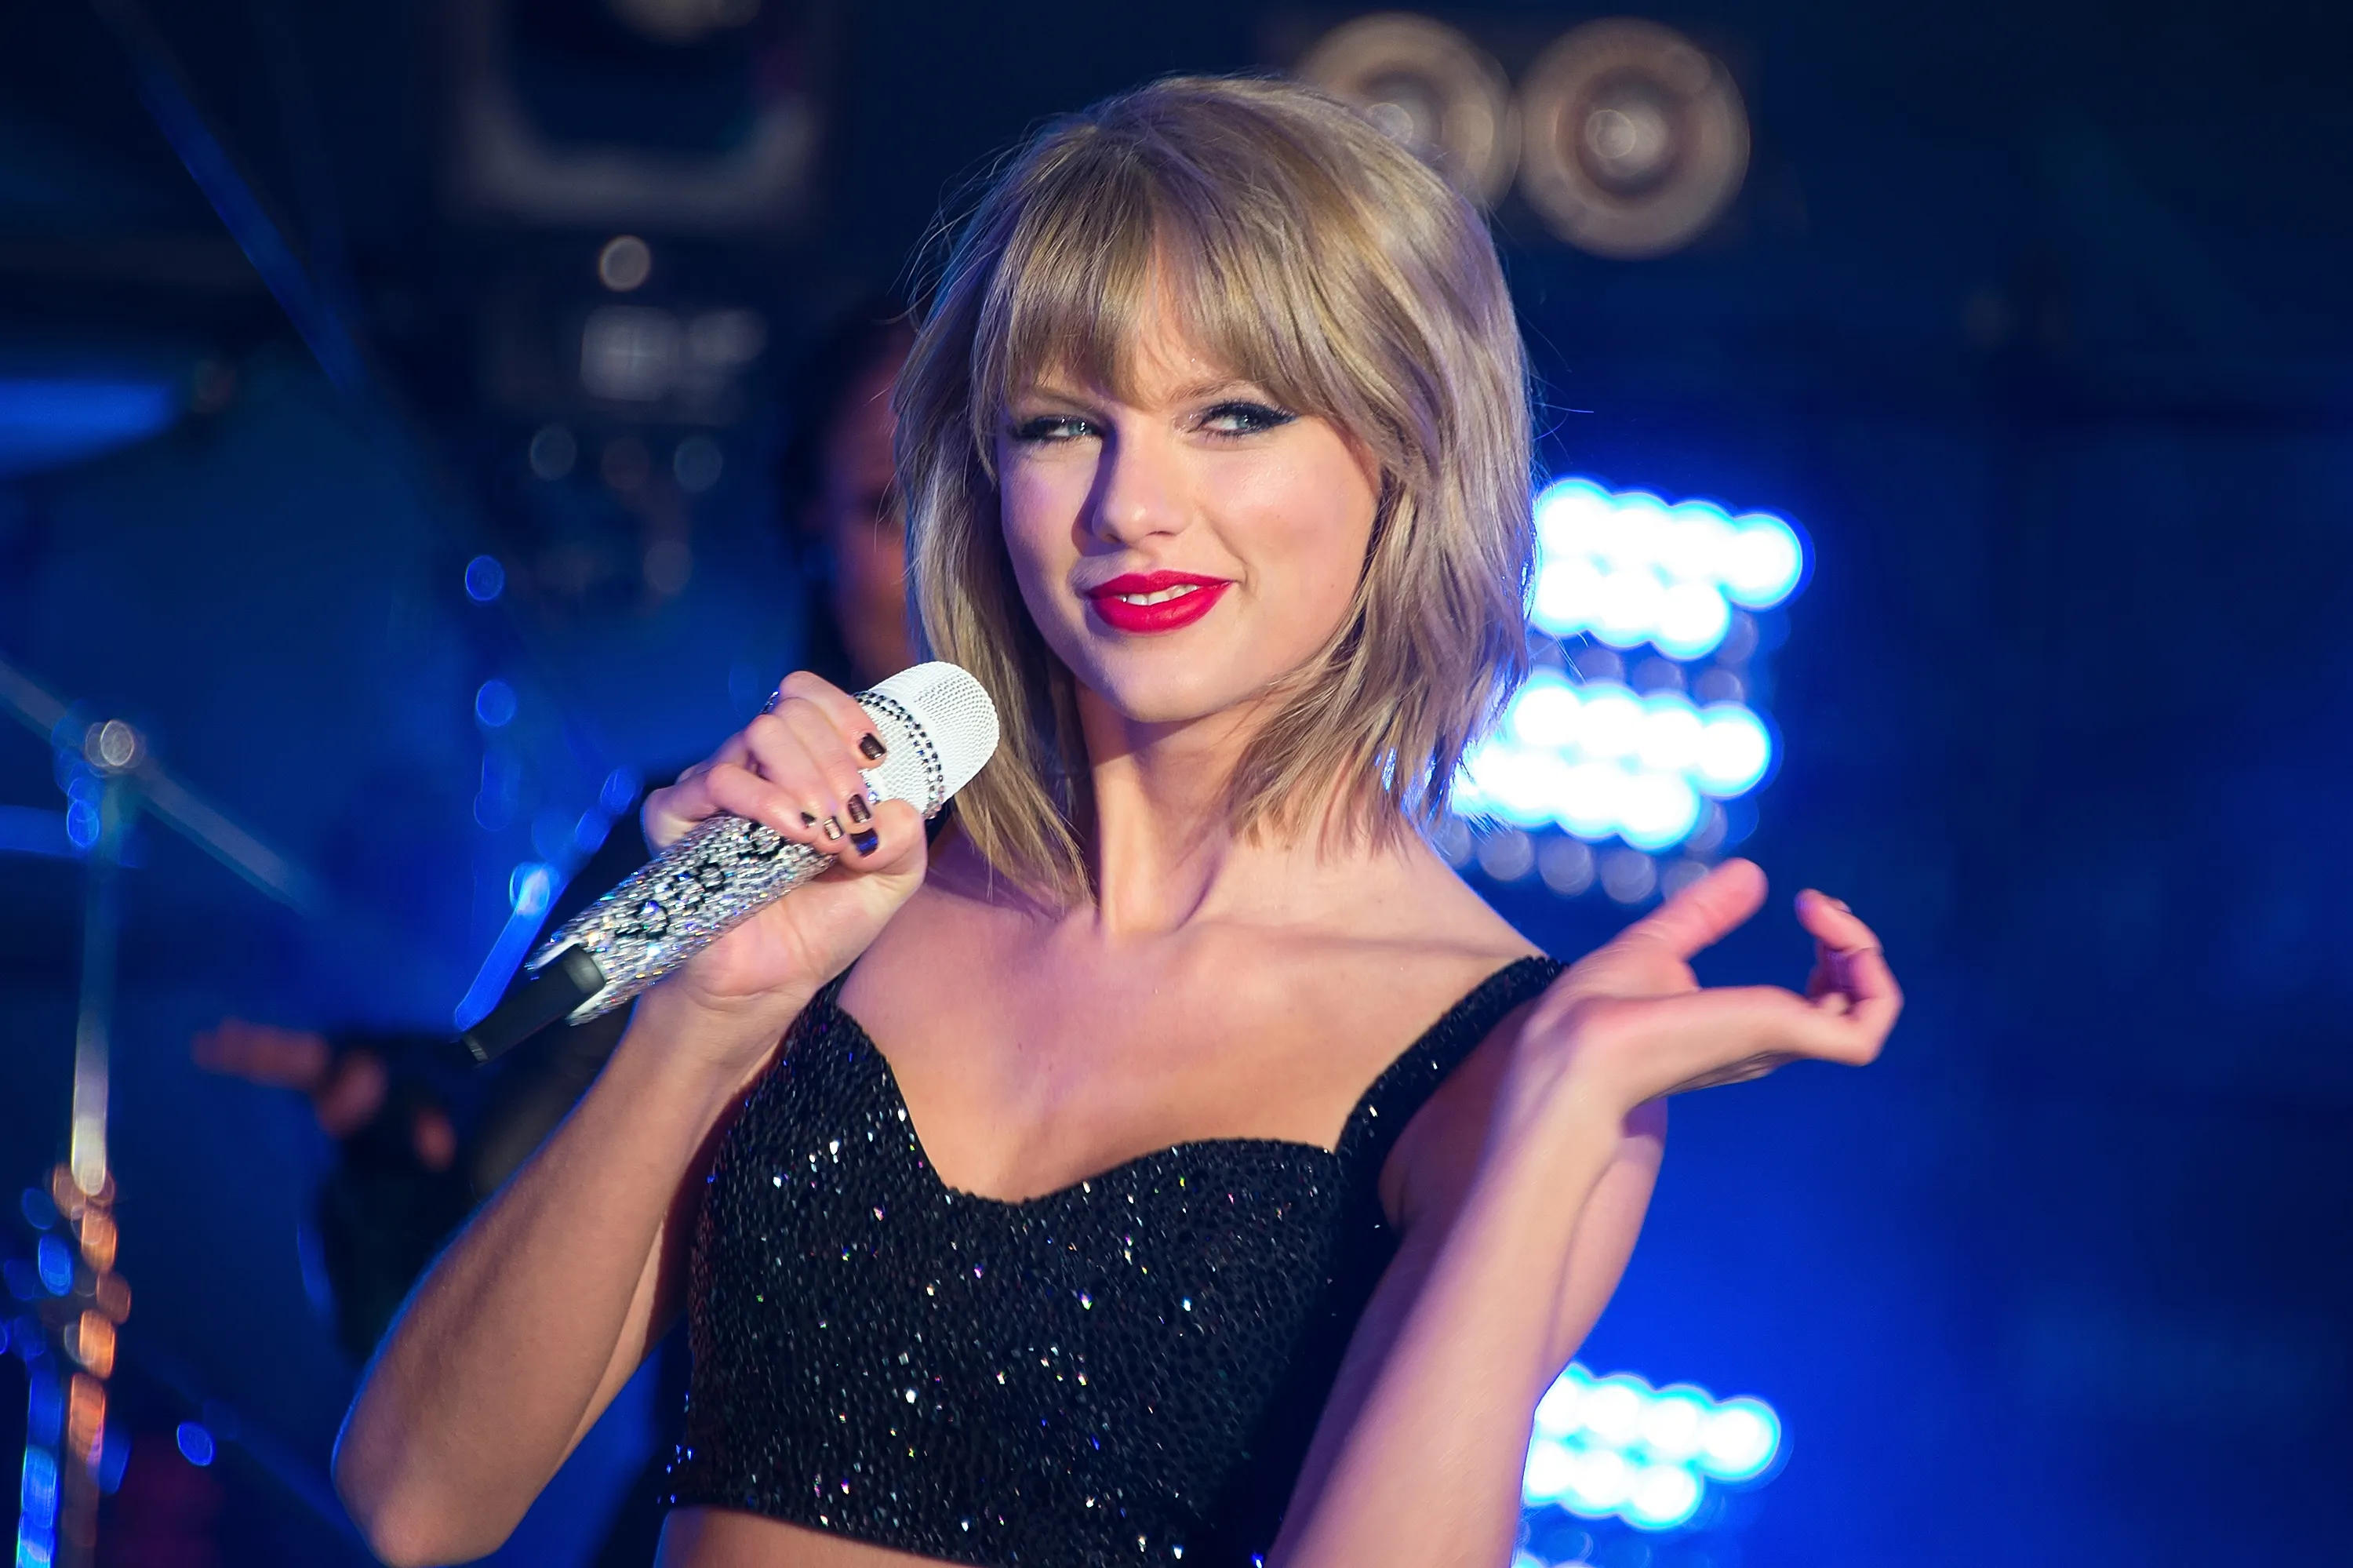 Can Taylor Swift Really Trademark "This Sick Beat"? Yes, and Here's Why